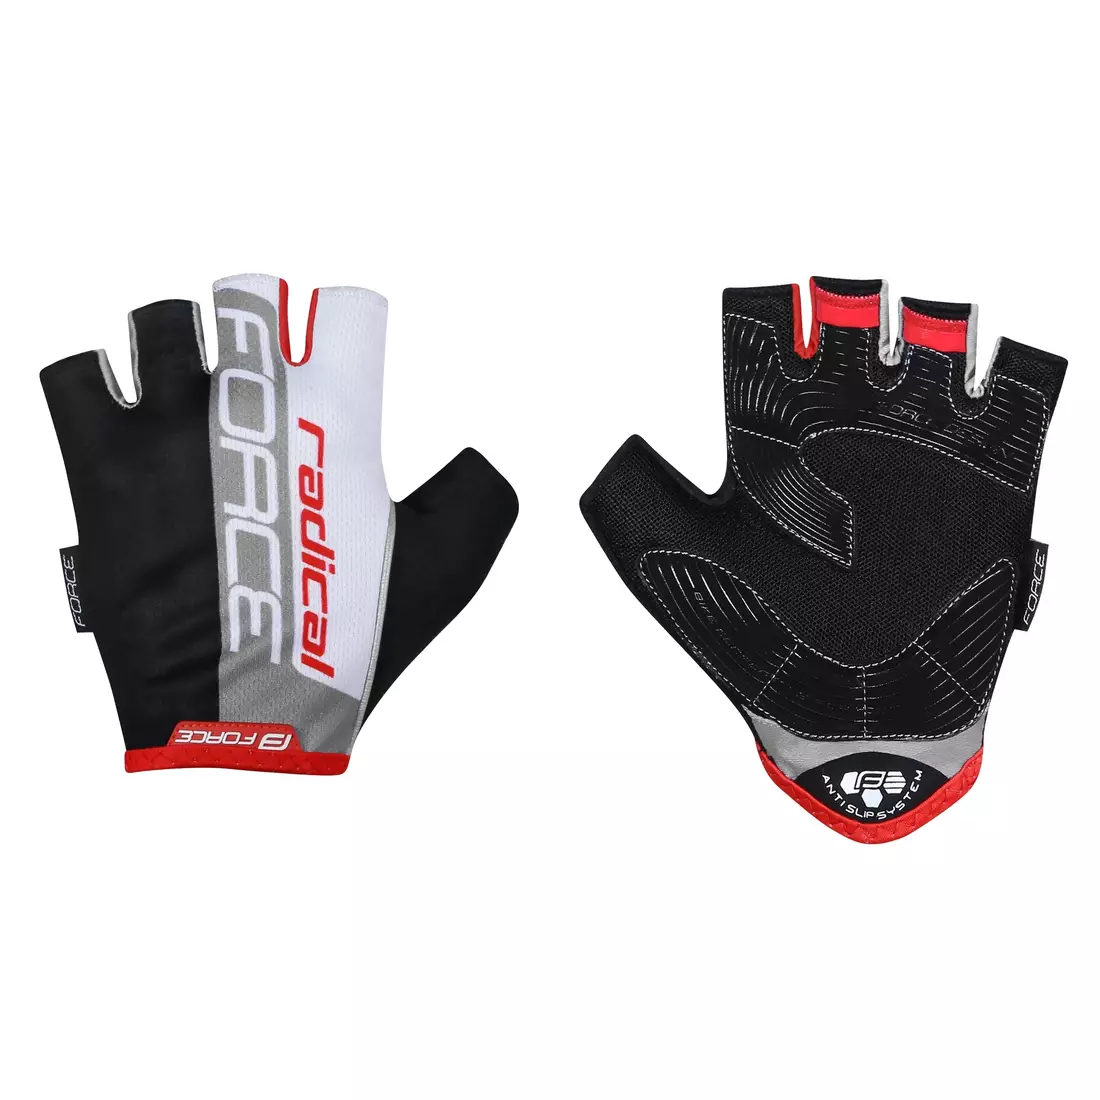 FORCE bicycle gloves radical white-red 905265-S